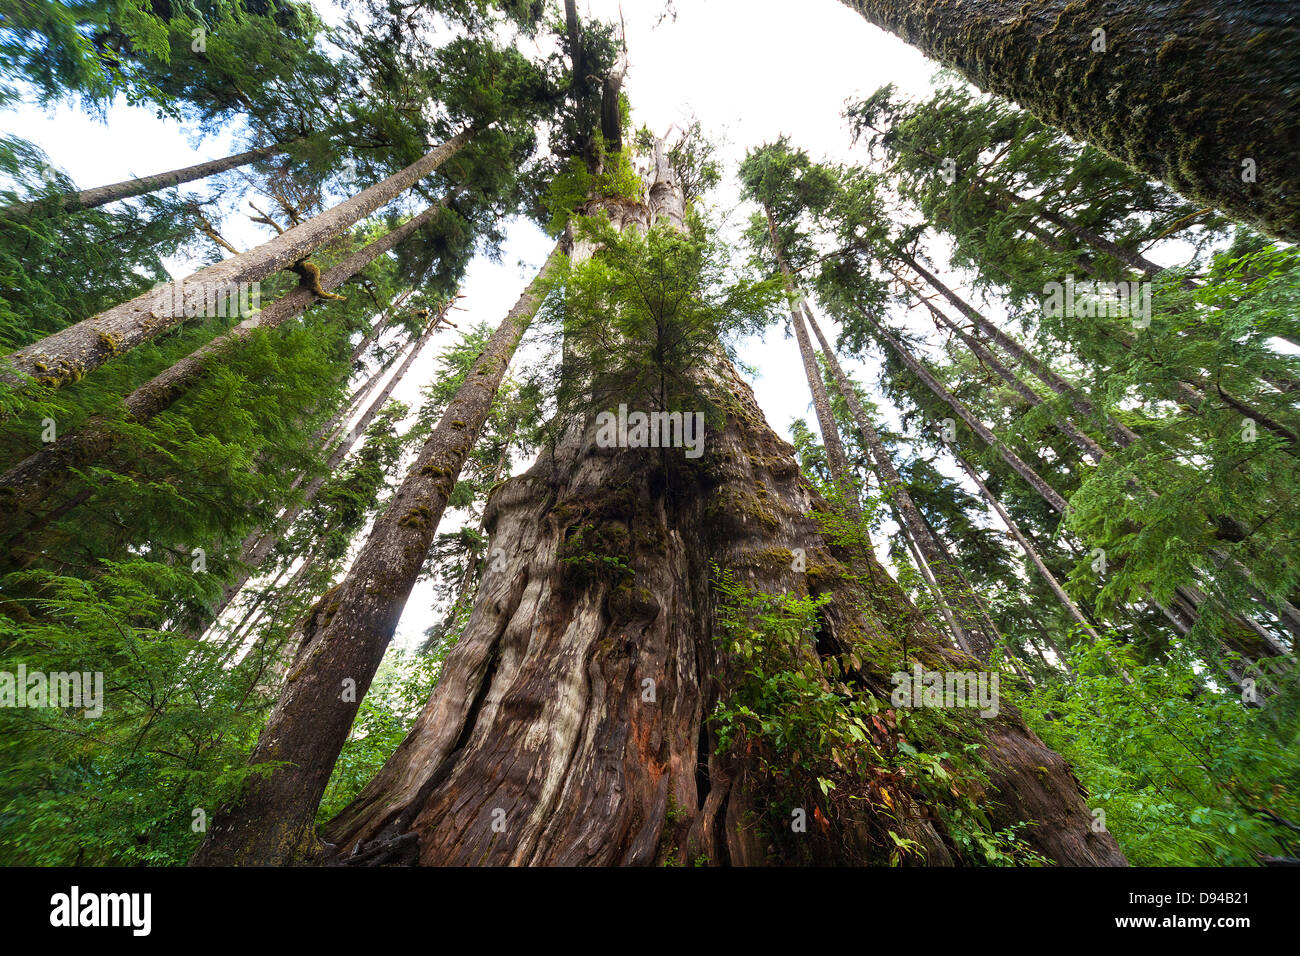 Tall trees in forest Stock Photo